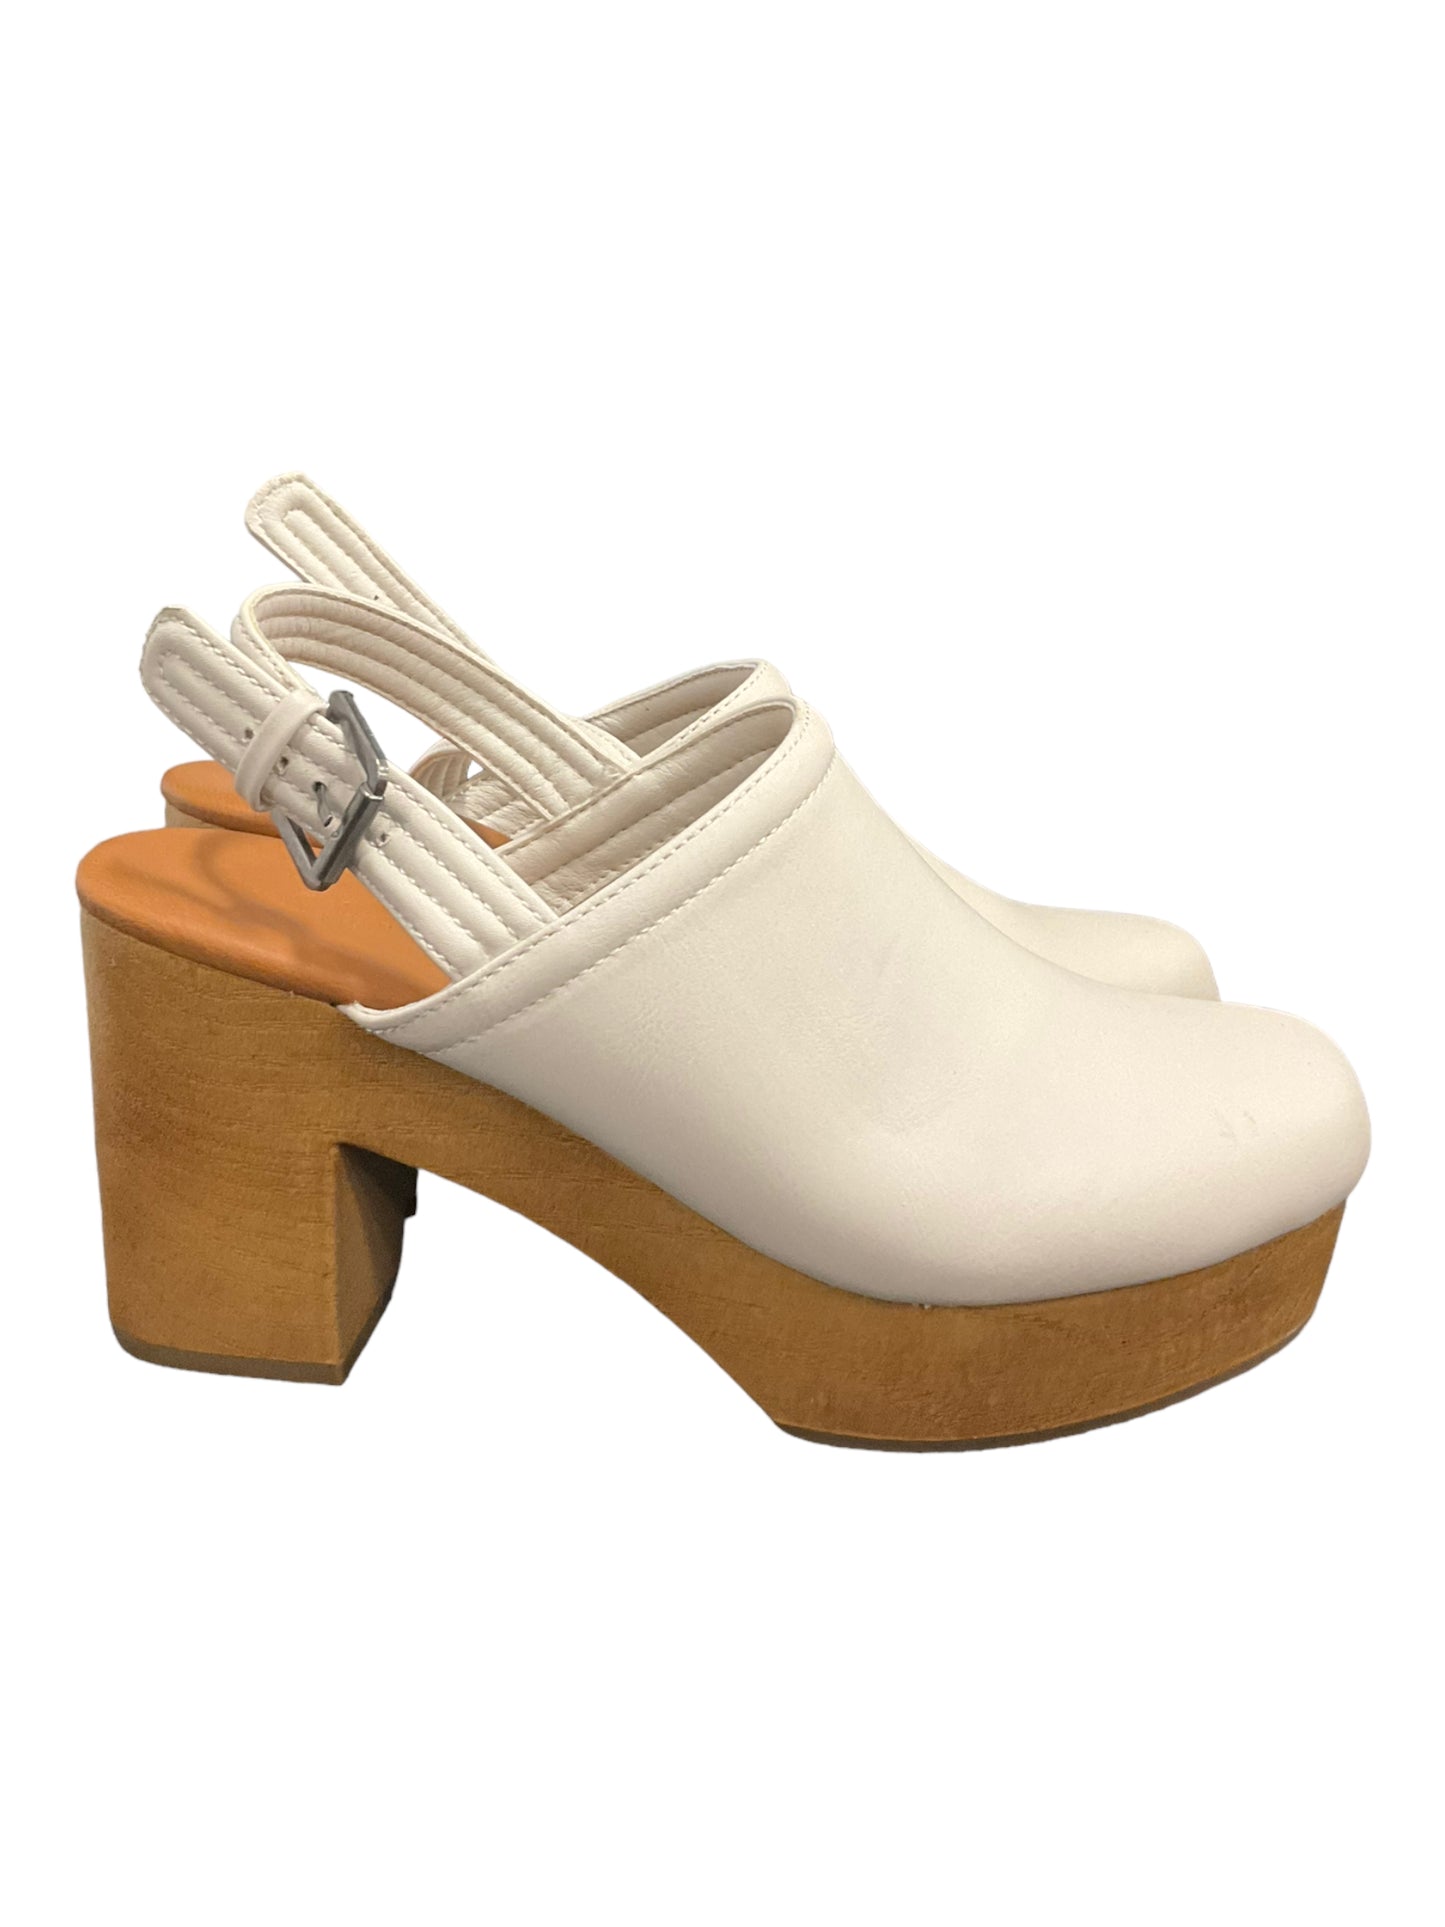 Shoes Heels Block By Universal Thread  Size: 9.5